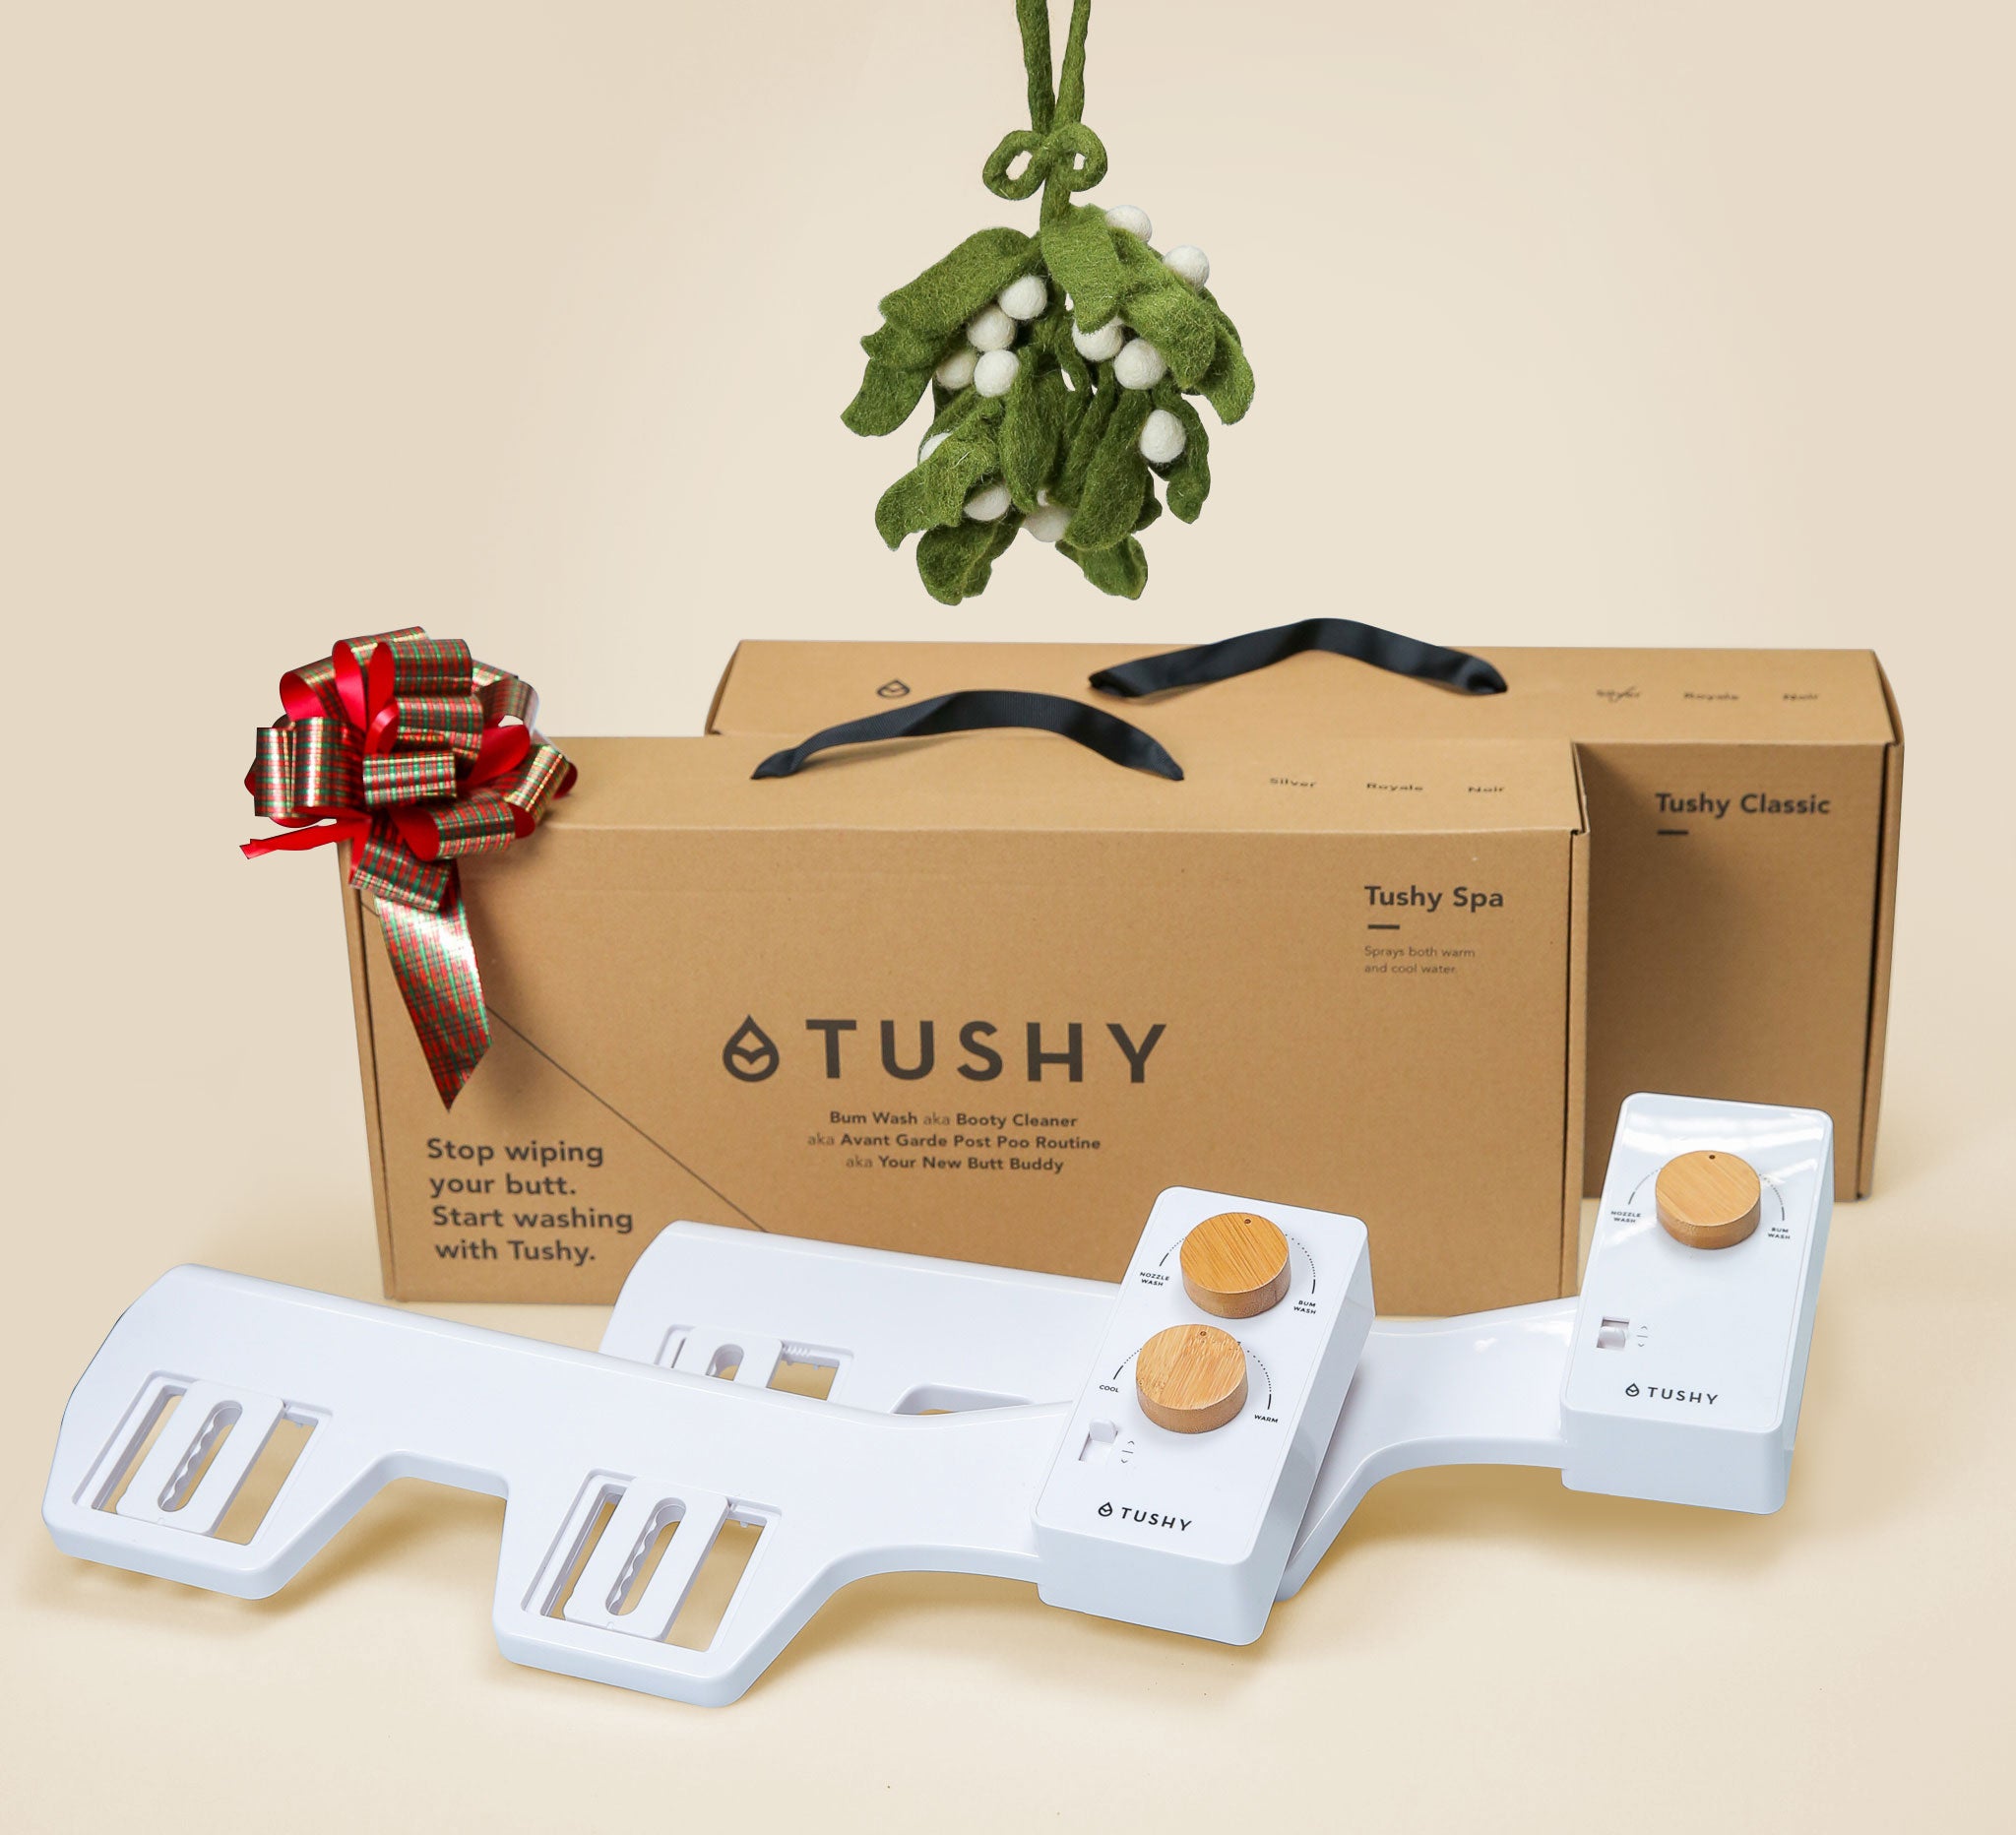 TUSHY's 2018 Holiday Gift Guide